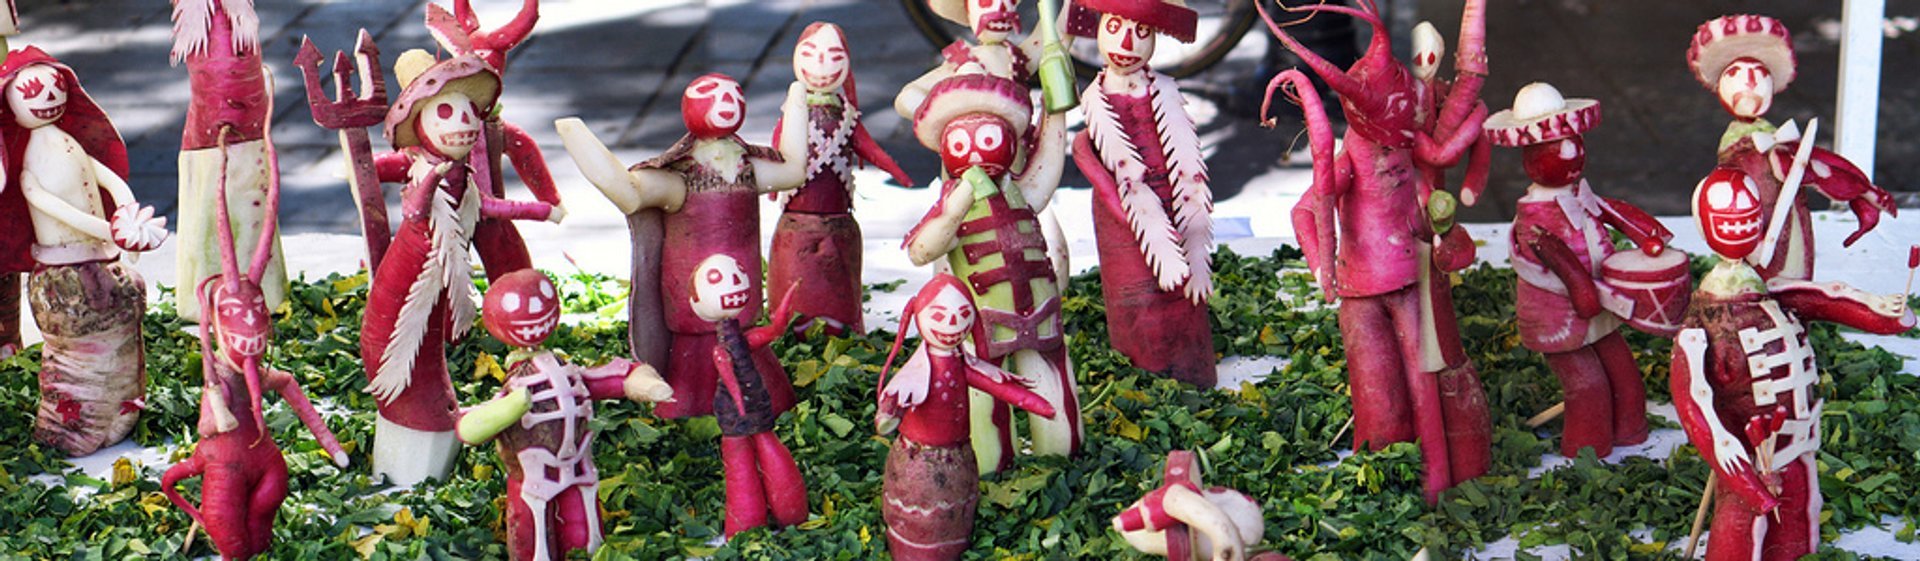 Noche de Rábanos or Night of the Radishes